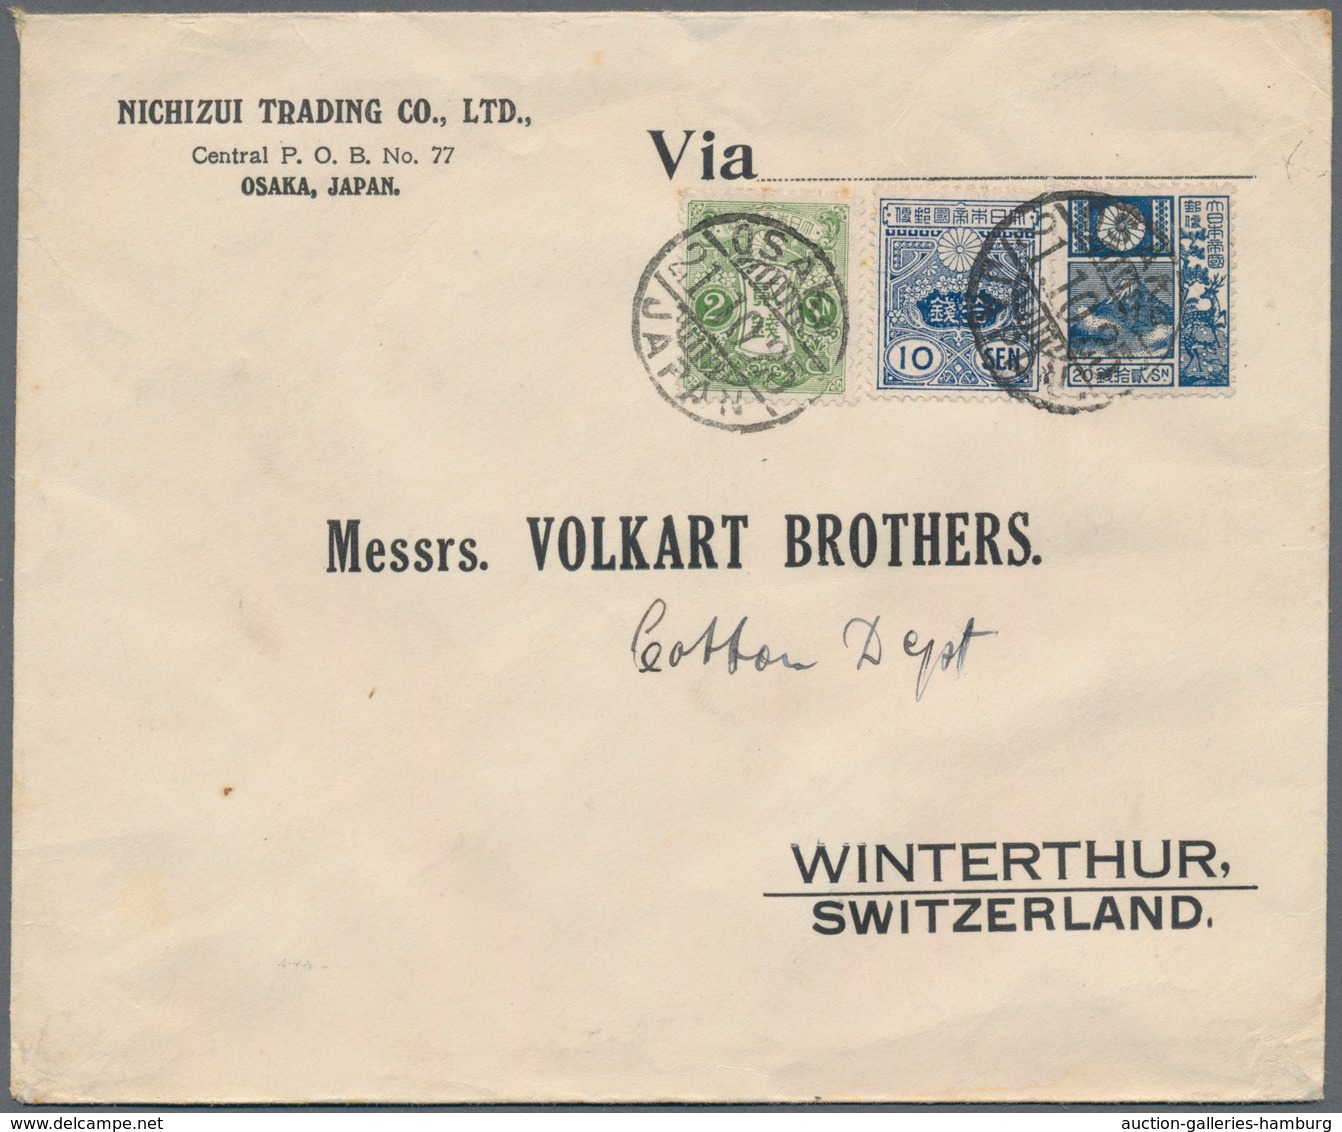 Japan: 1917/29, covers to Switzerland (3) or Finland (1): printed matter with french censor tape, re